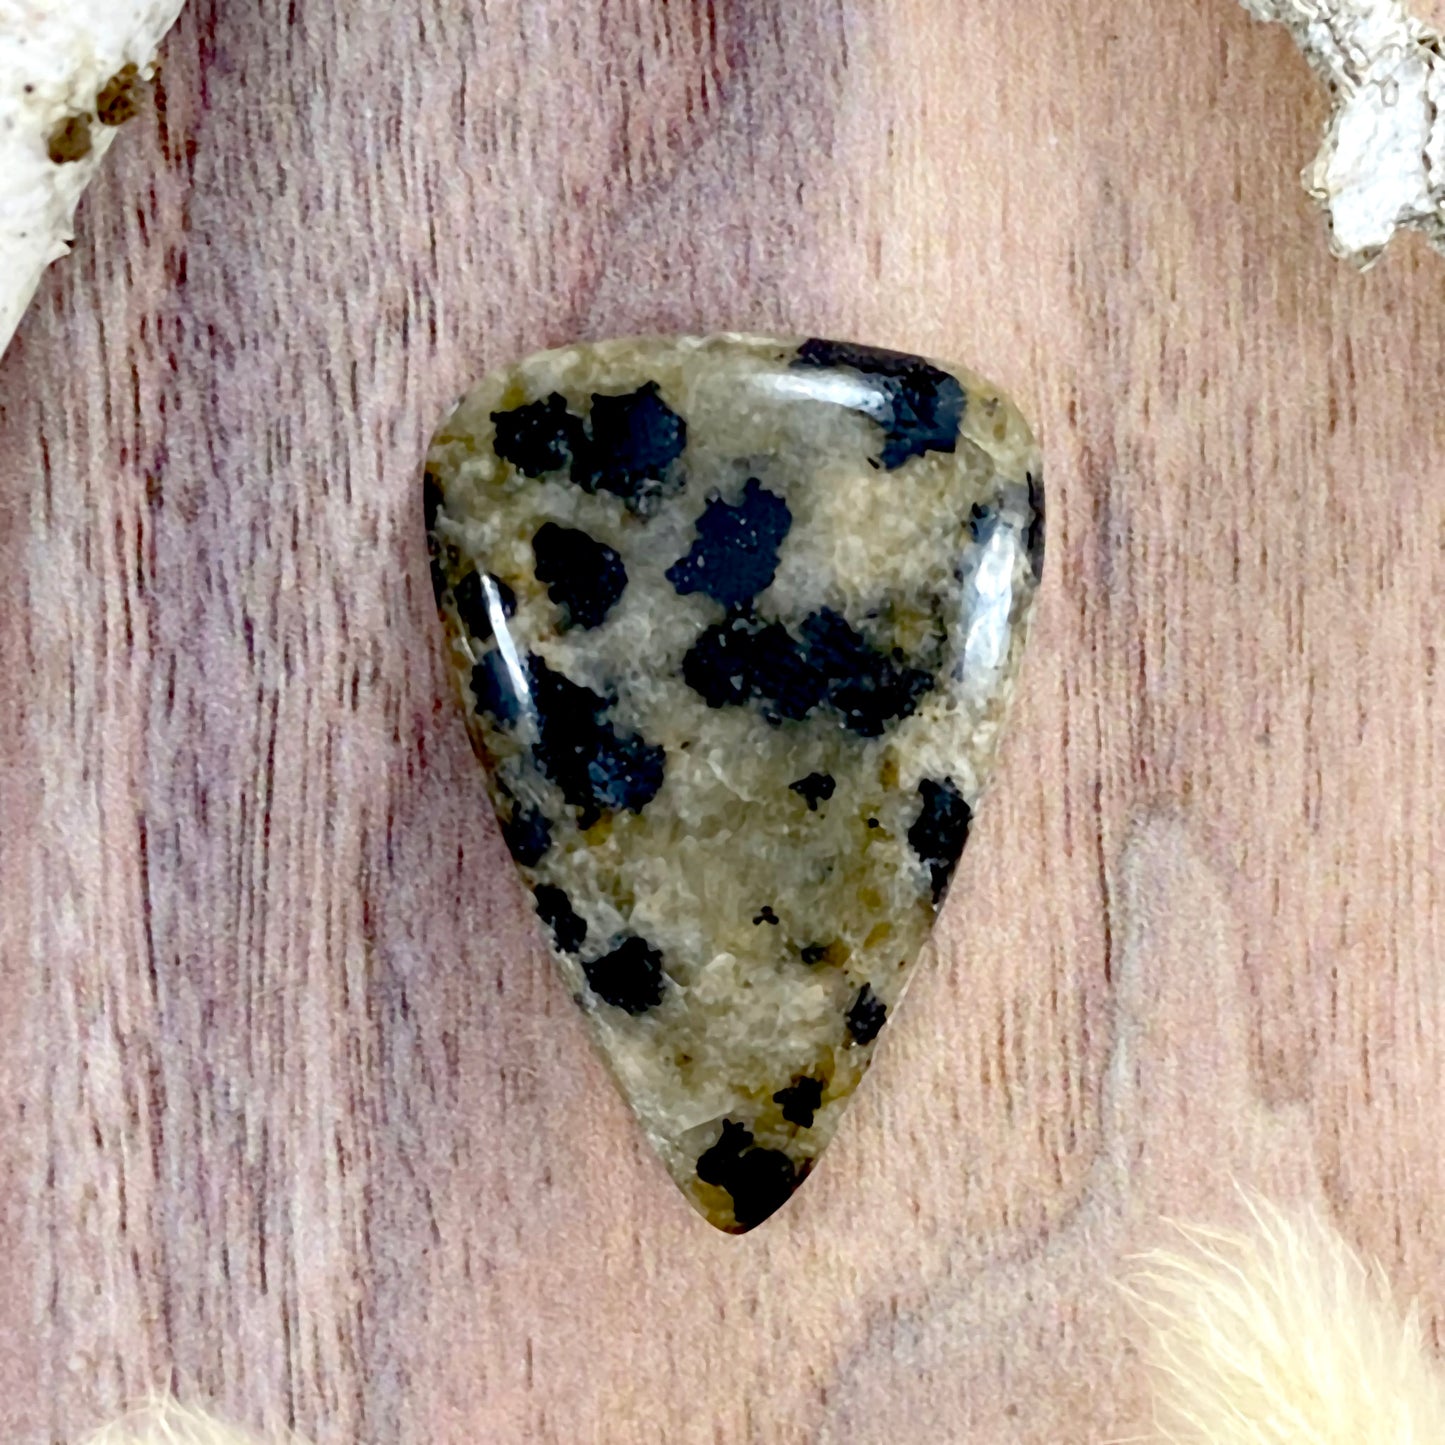 Dalmatian Stone Cabochon Front View - Stone Treasures by the Lake